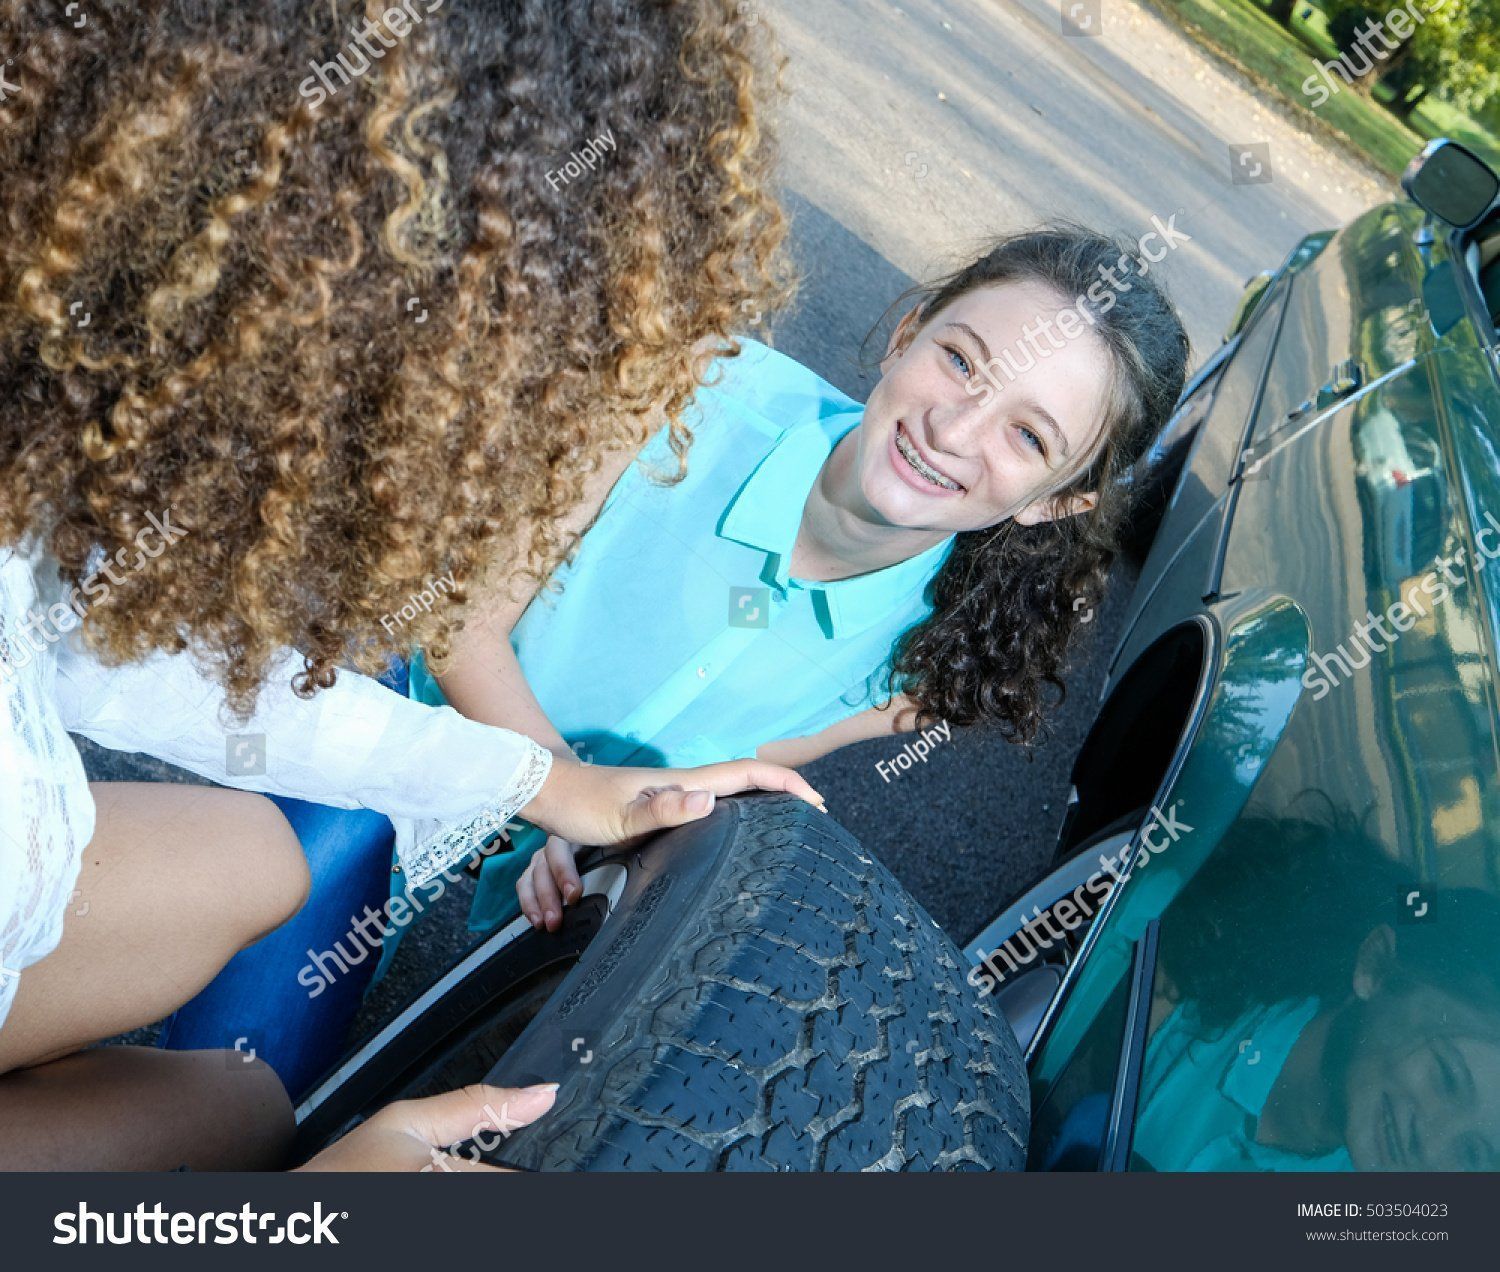 best of Girl in car changing Teen